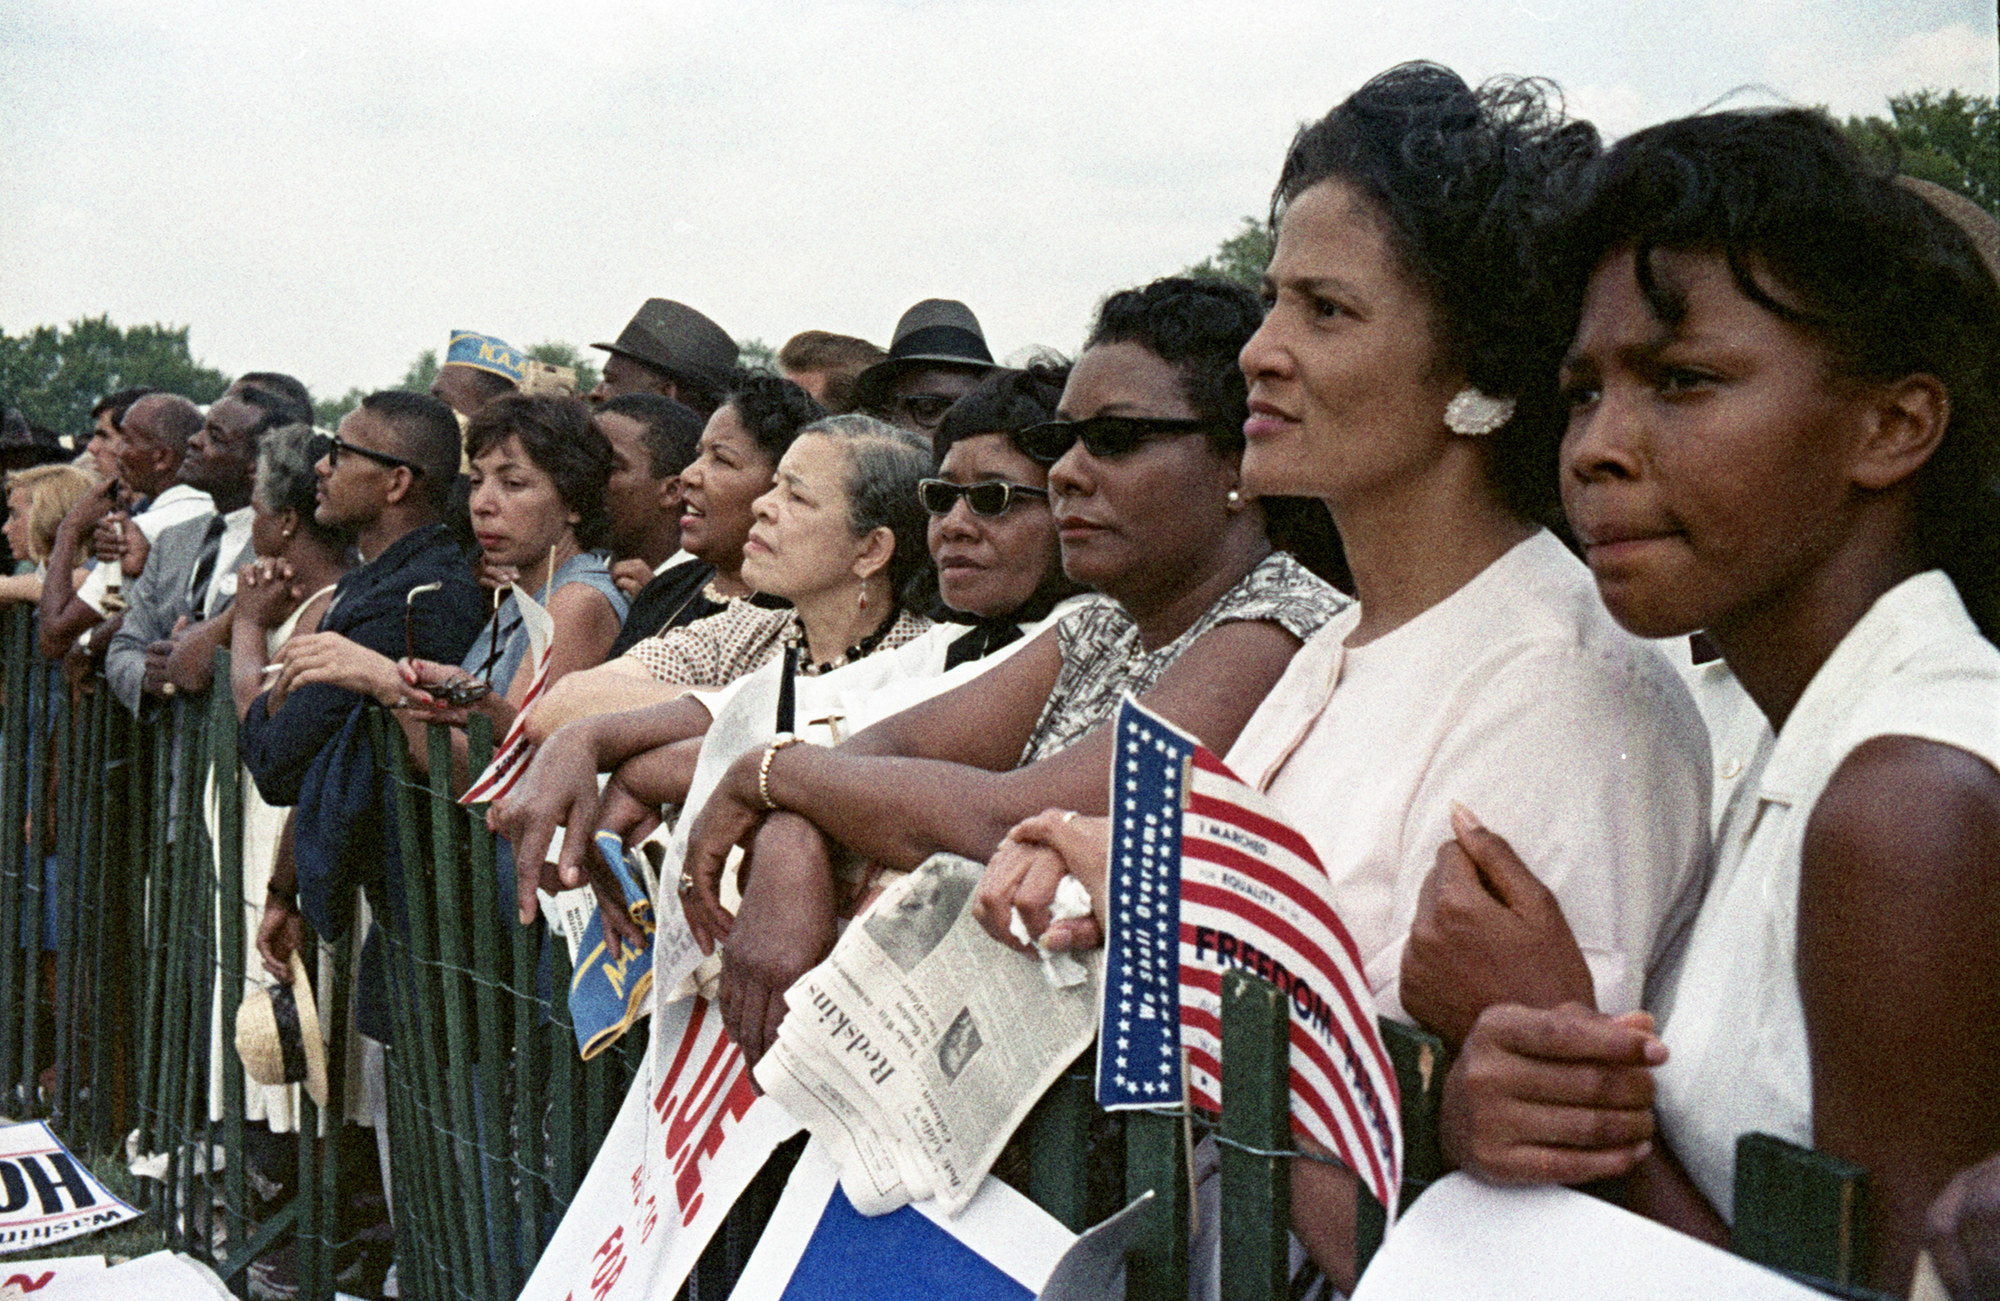 Attendees of the March on Washington are pictured with solemn faces.